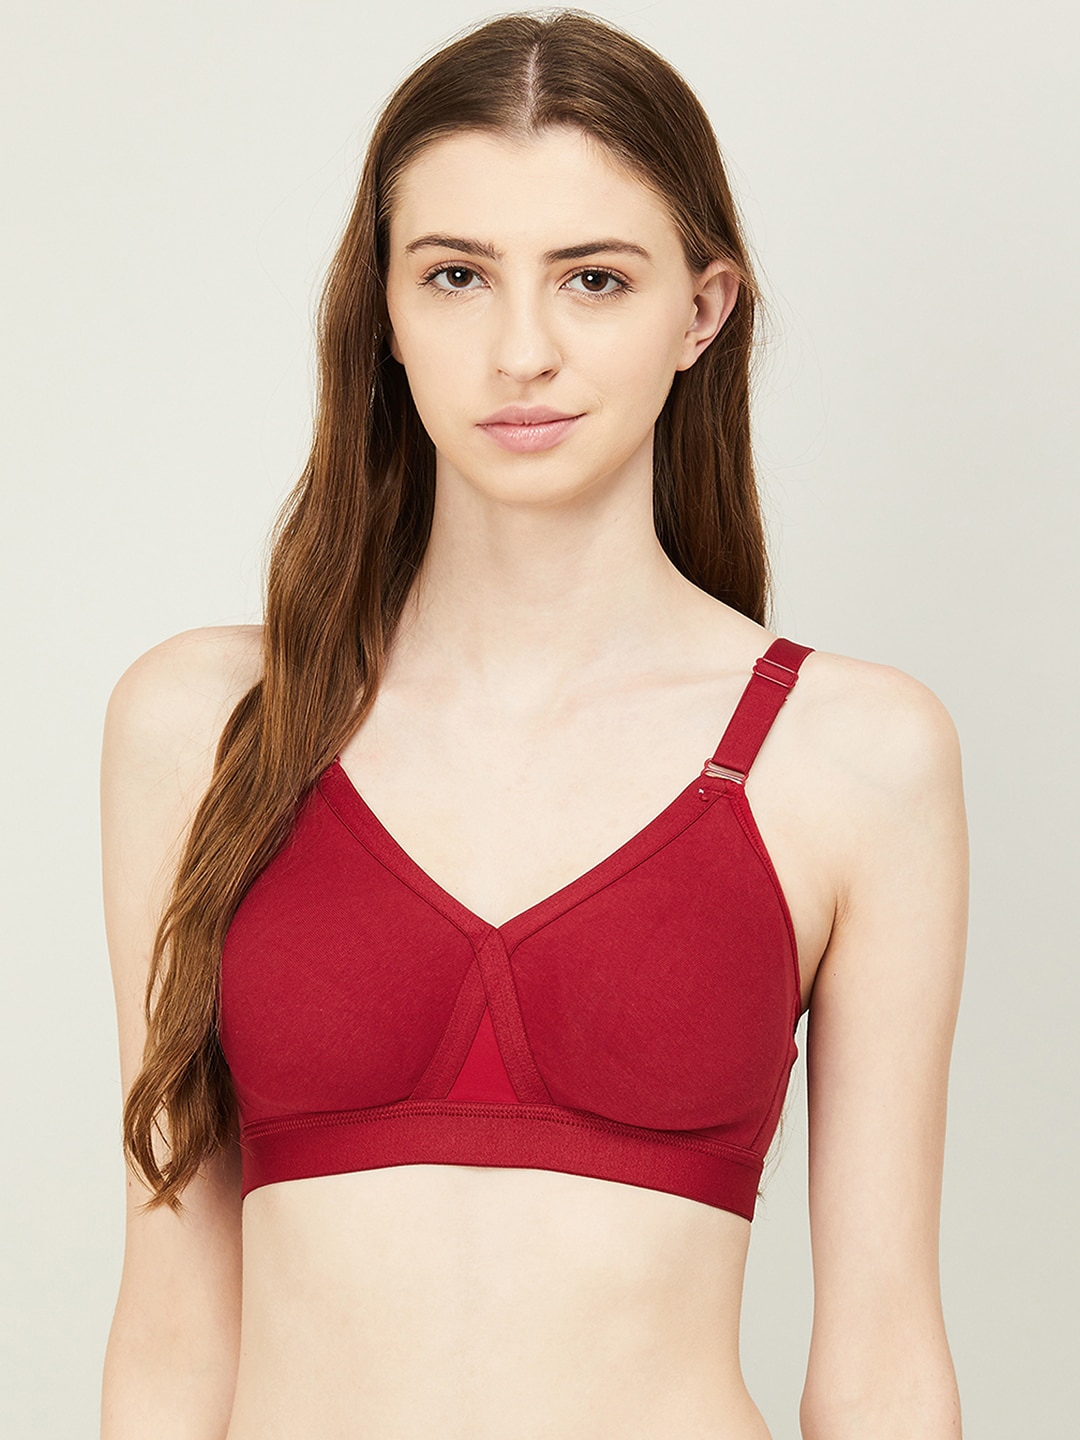 Mnika textiless Women Full Coverage Non Padded Bra - Buy Mnika textiless  Women Full Coverage Non Padded Bra Online at Best Prices in India